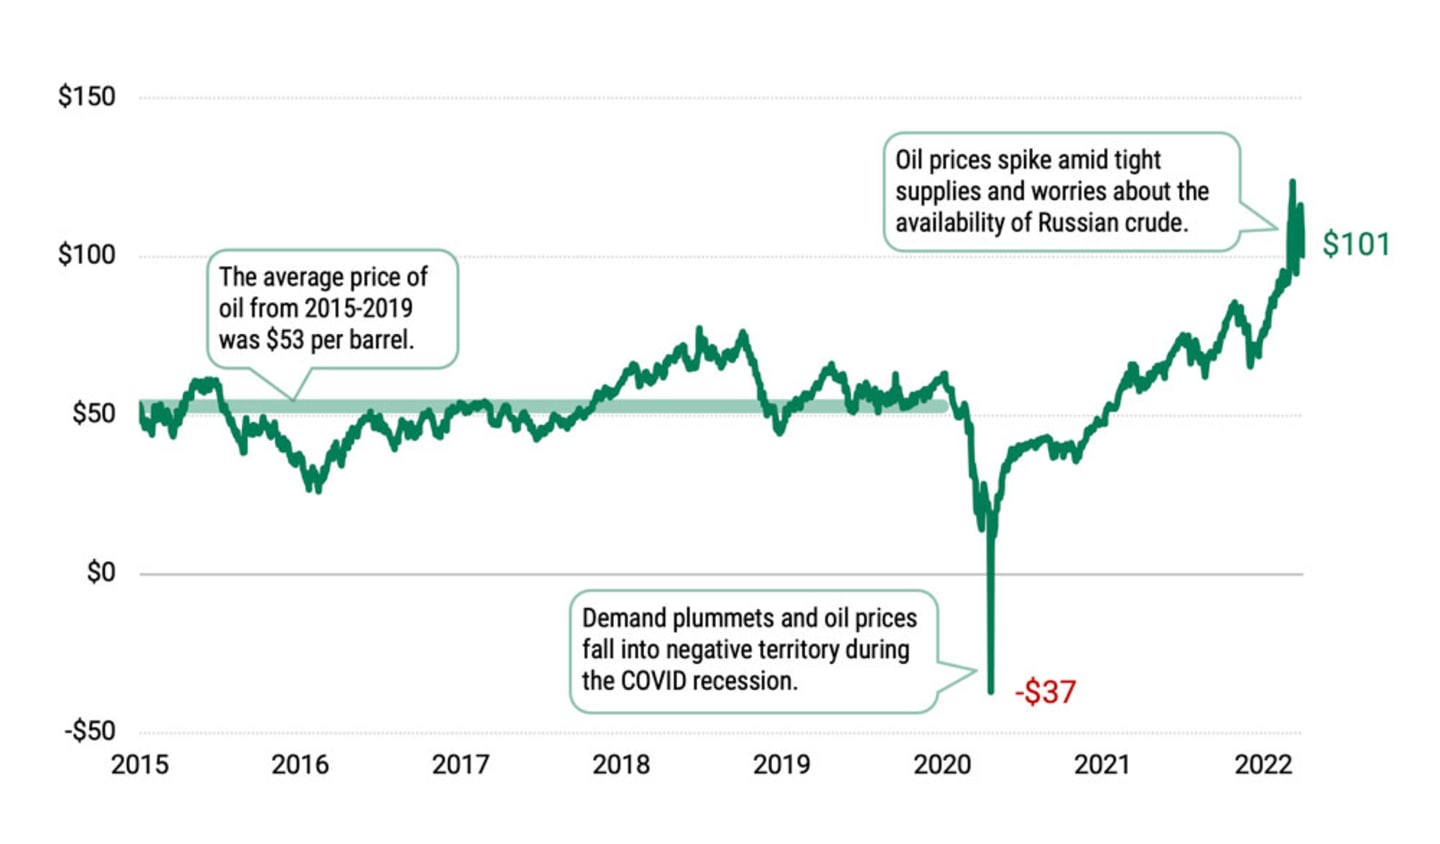 Line chart showing stable oil prices from 2015 until the dramatic fall and rise in prices from early 2020 through March 31, 2022.